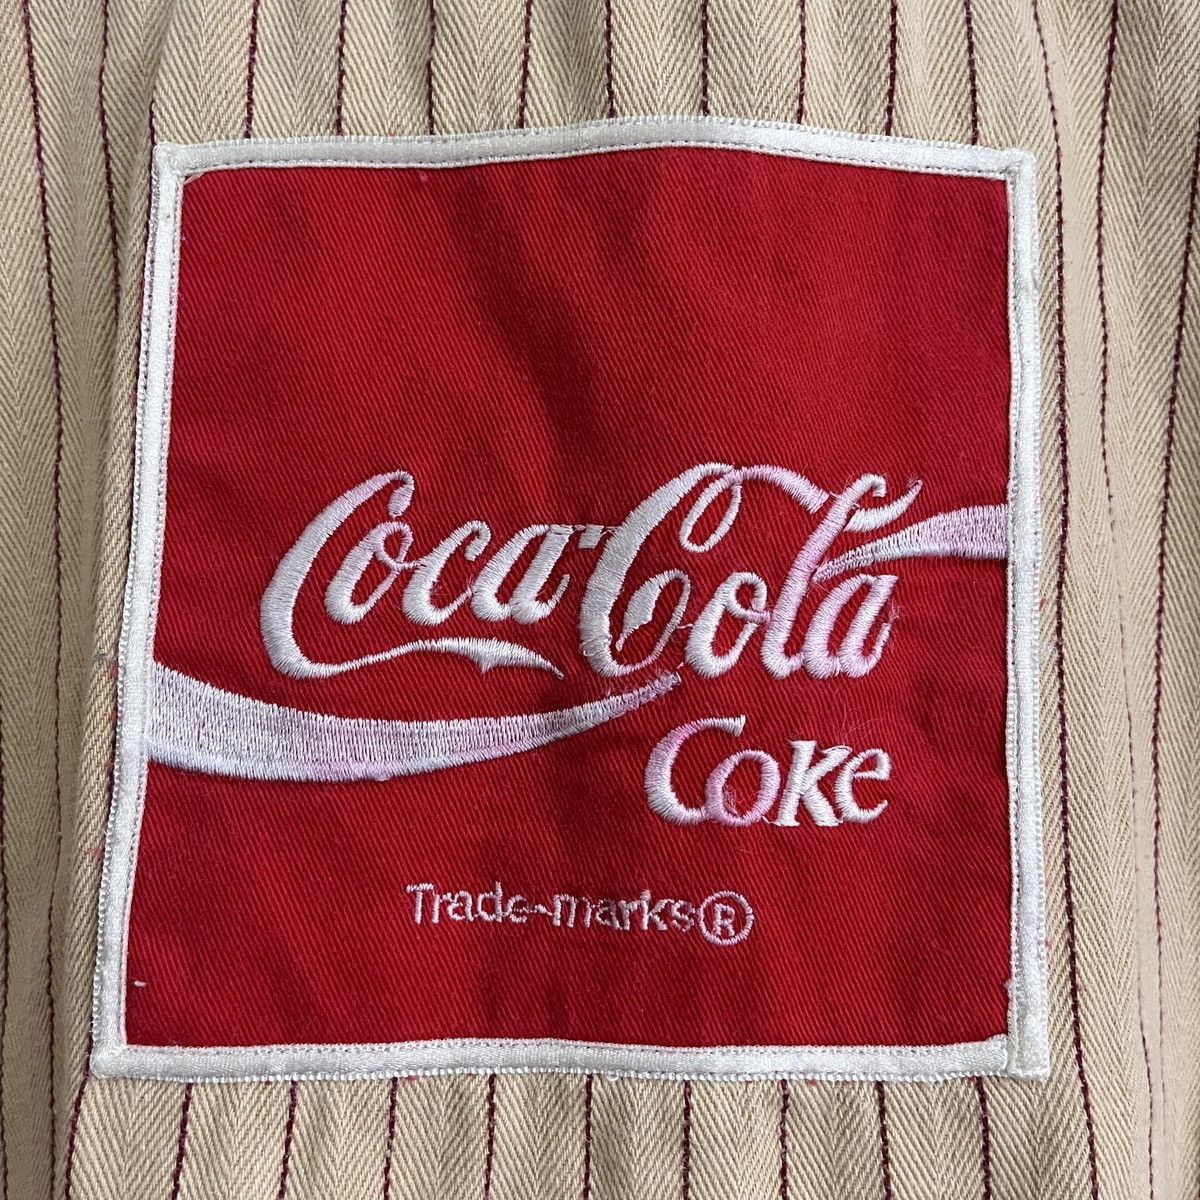 Vintage Coca Cola Hickory Buttons Up Shirt - 12